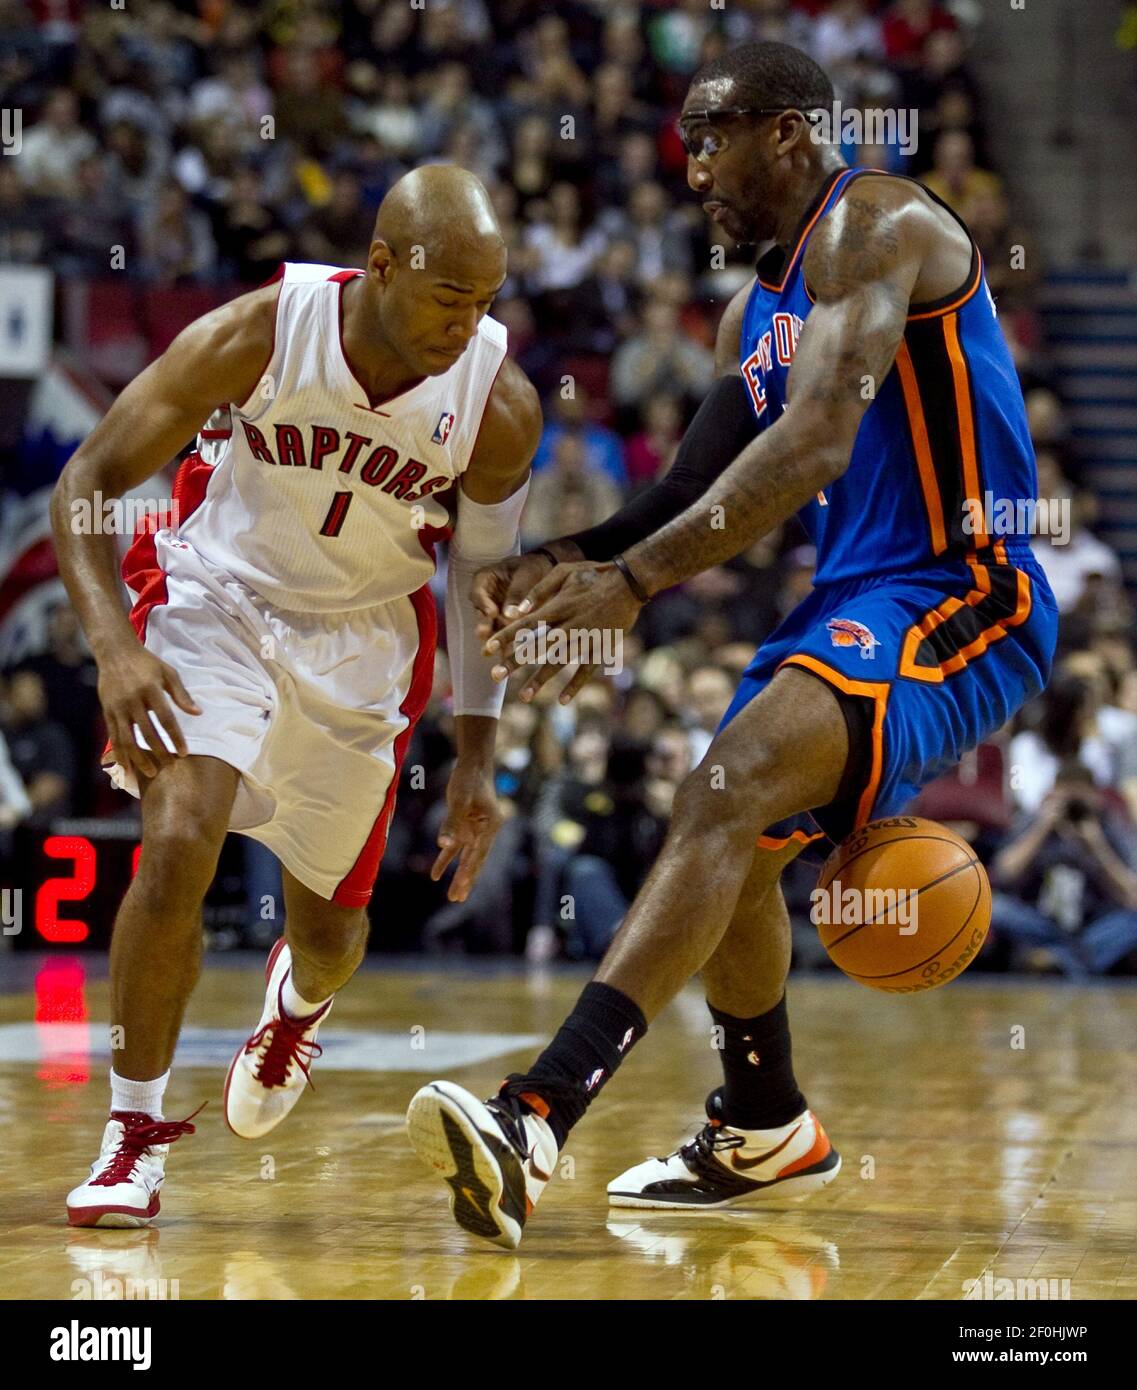 Toronto Raptors point guard Jarrett Jack (1) looses the ball between the  legs of New York Knicks power forward Amare Stoudemire (1) during the first  half of a preseason game at the